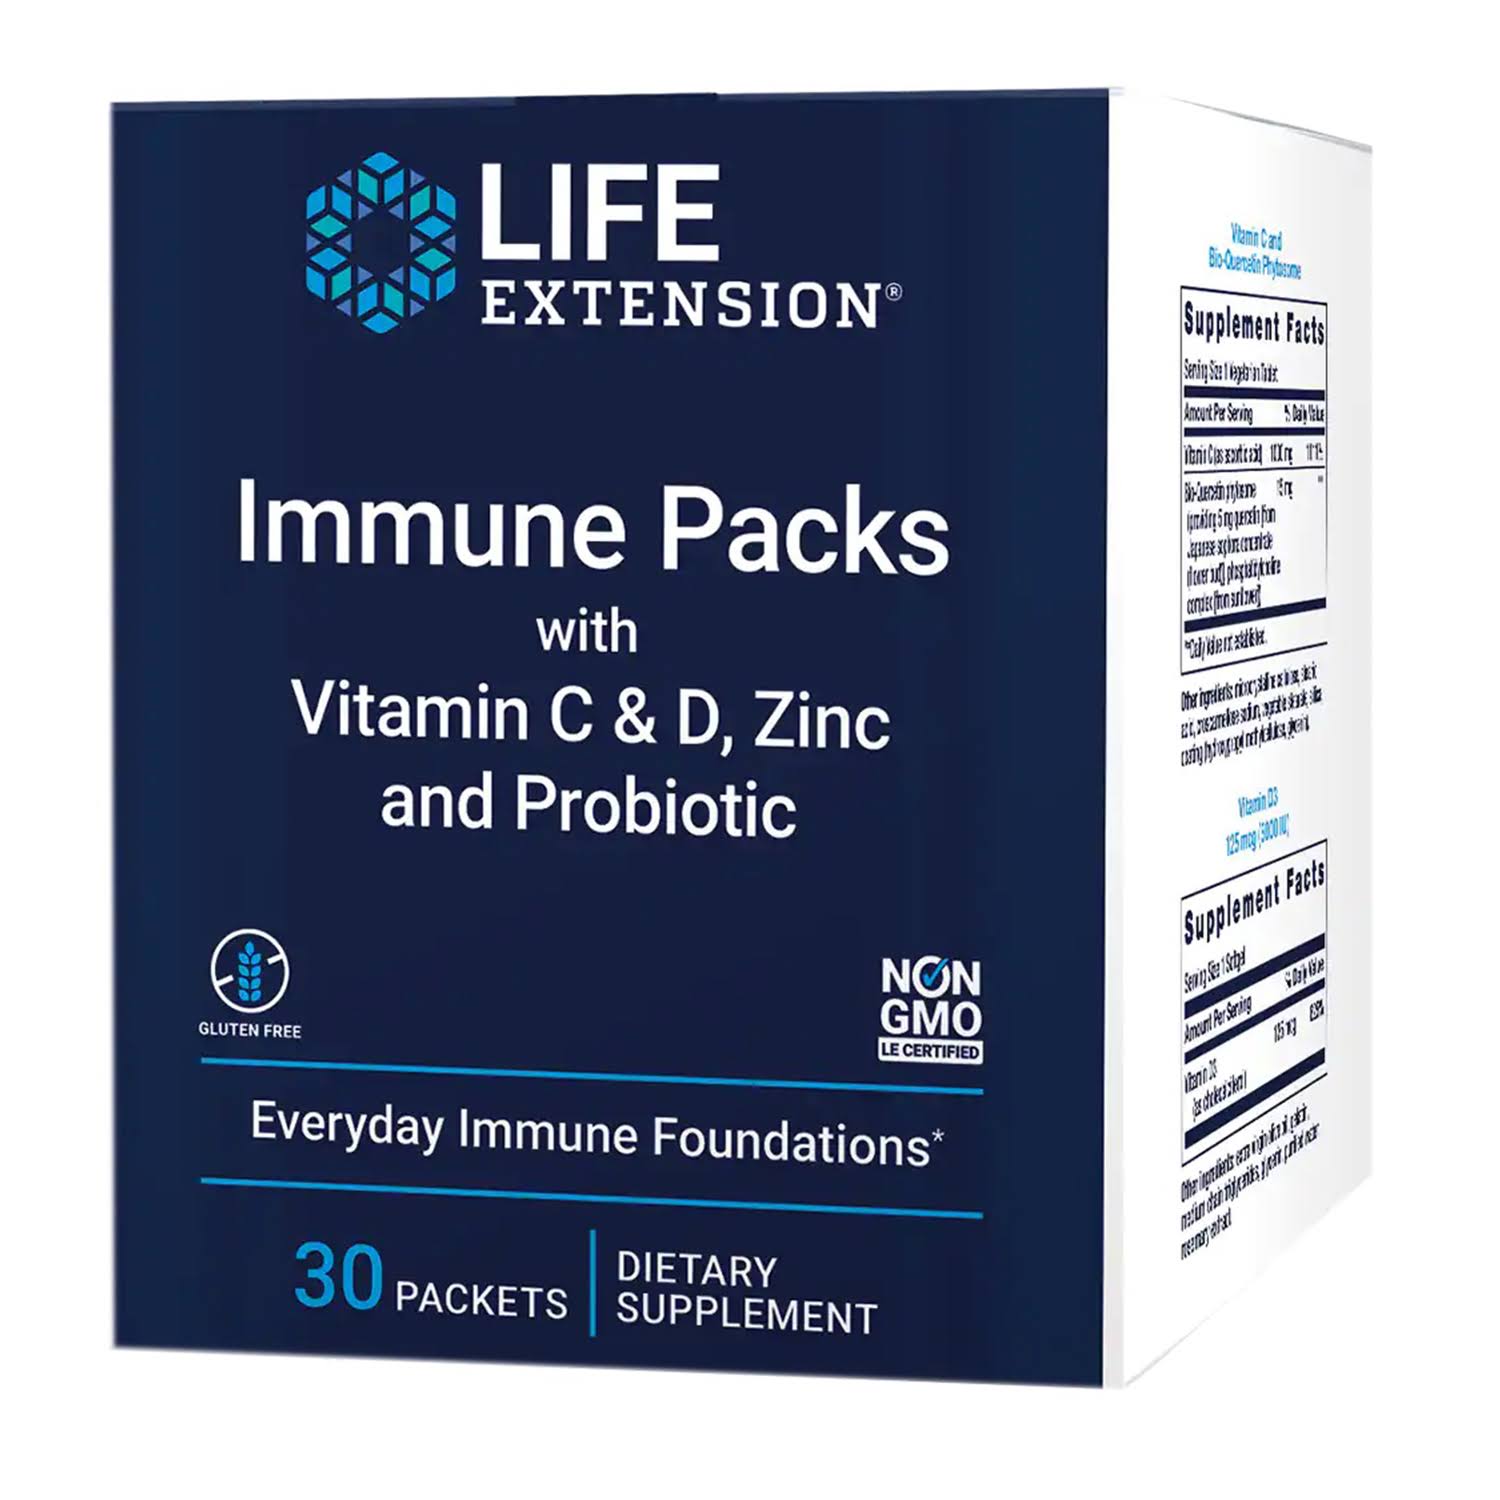 Life Extension Immune Packs - 30 Packets